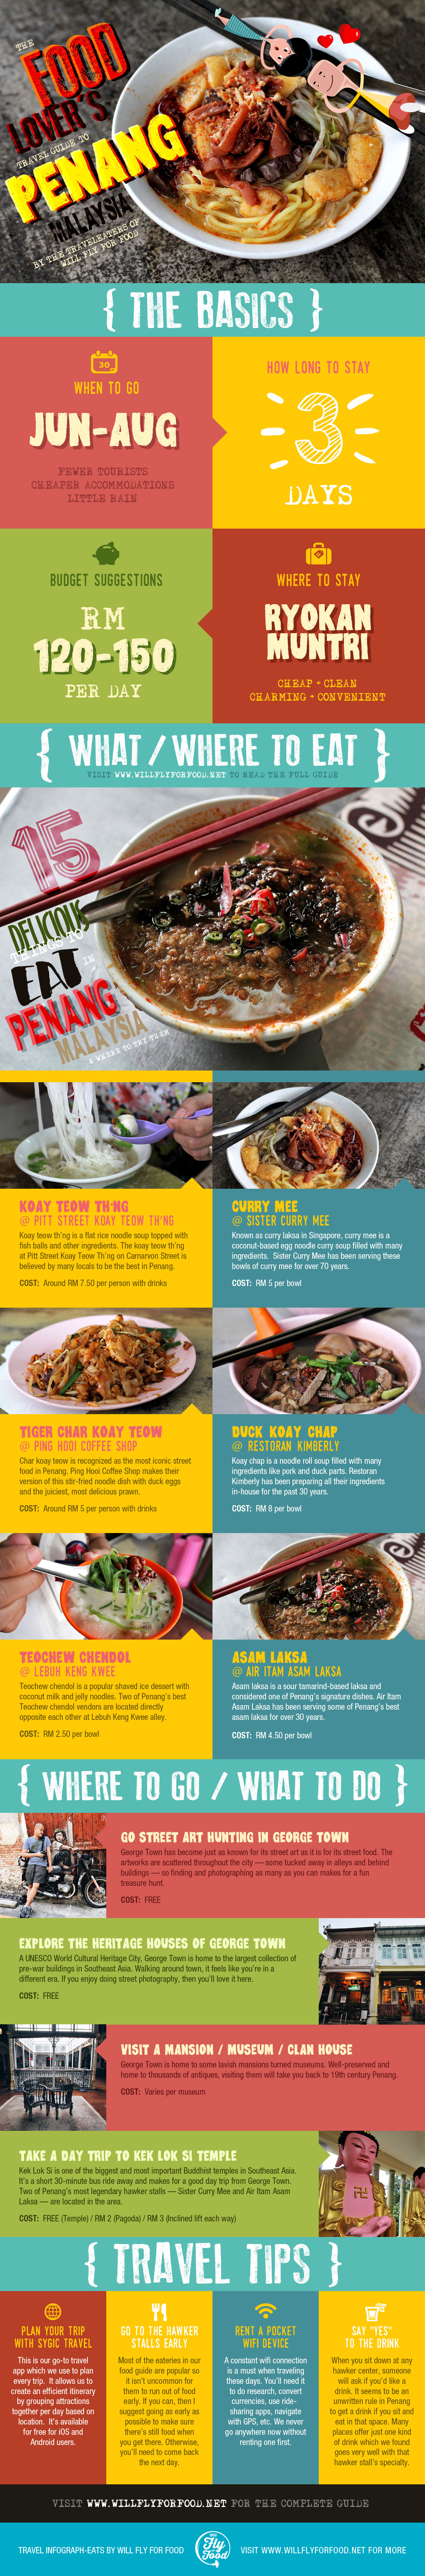 The Food-Lover's Travel Guide to Penang, Malaysia